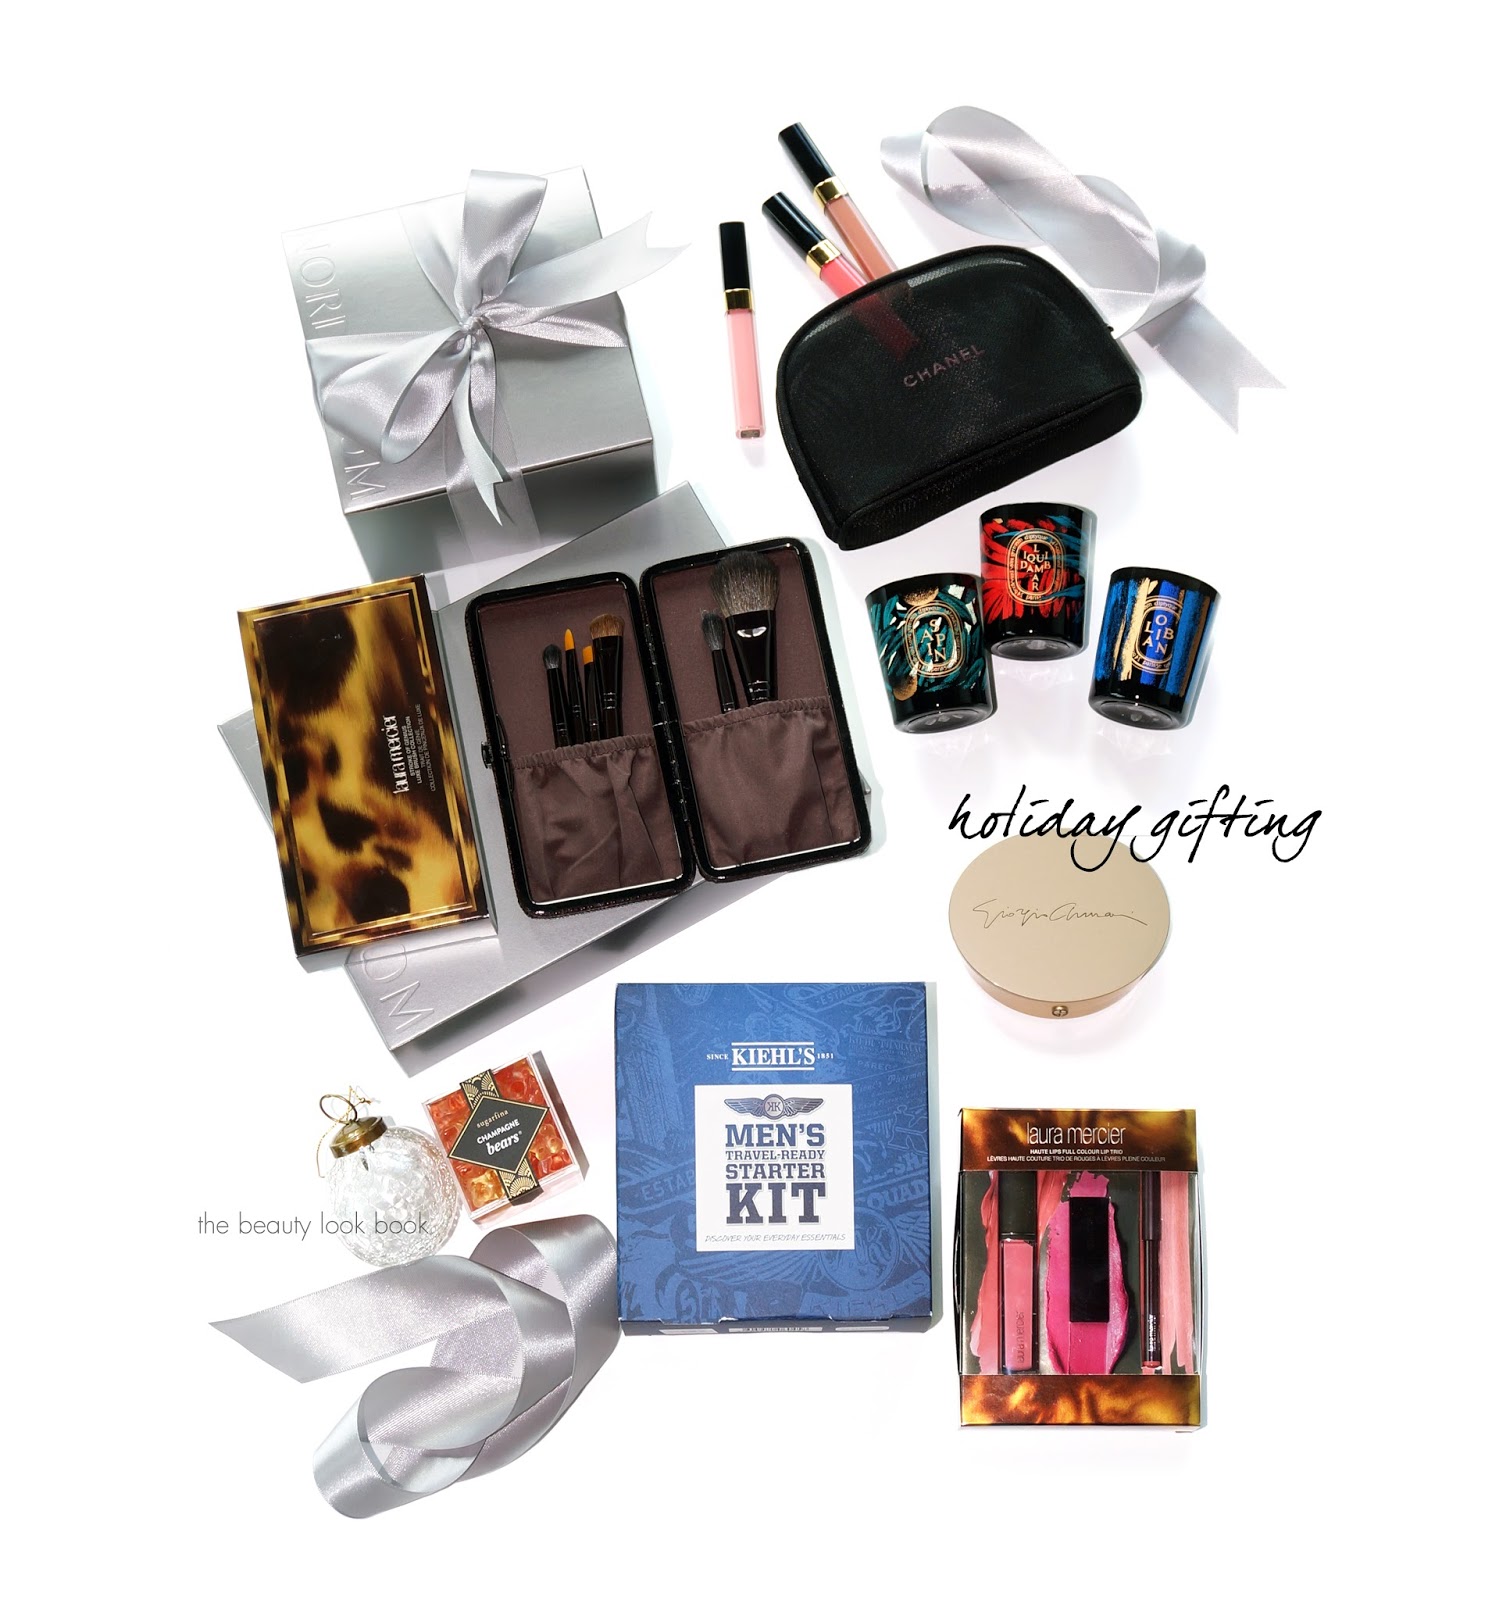 Holiday Beauty and Grooming Gifts from Nordstrom - The Beauty Look Book